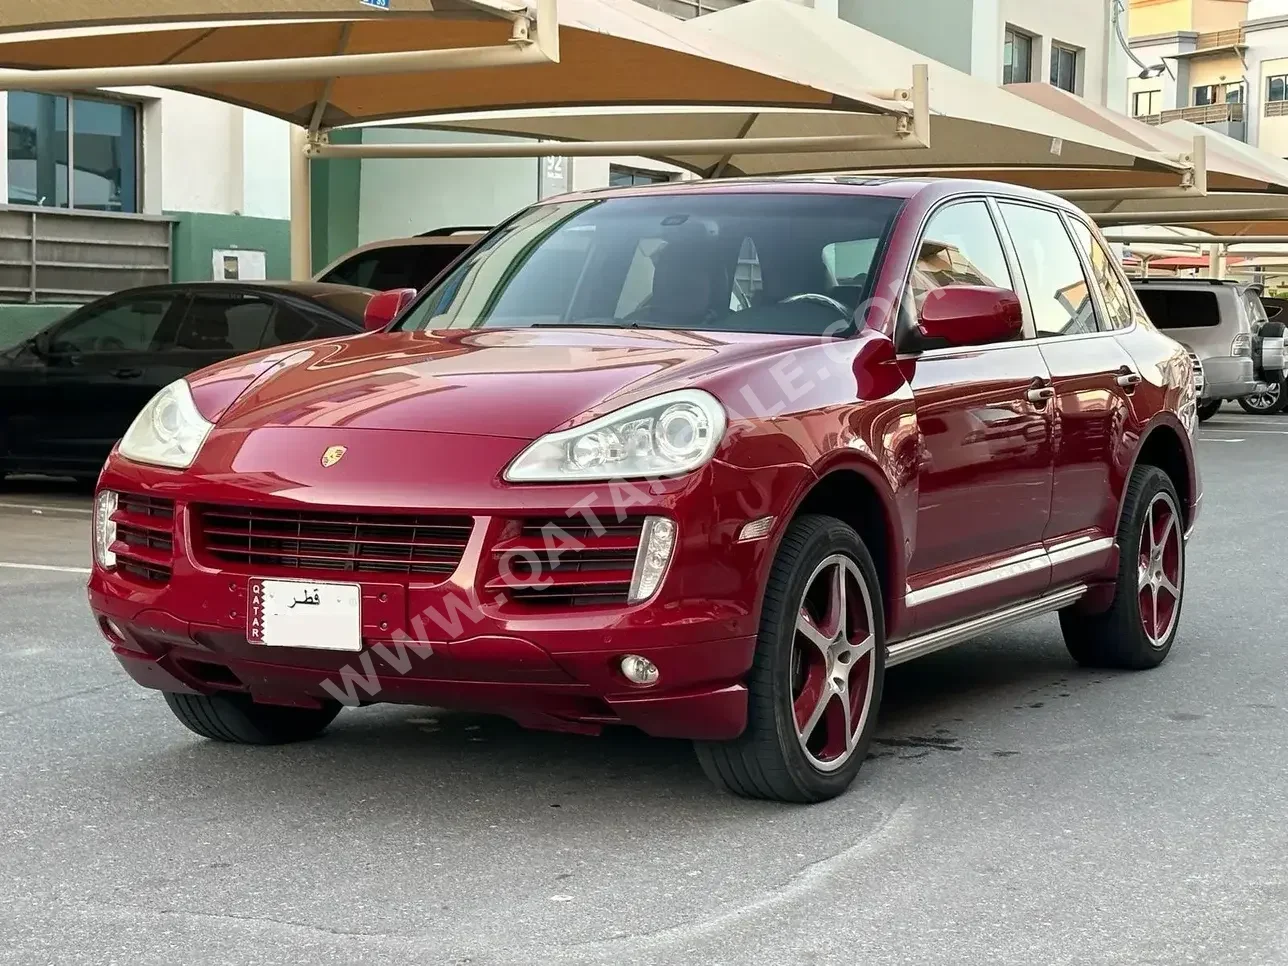 Porsche  Cayenne  2009  Automatic  252,000 Km  6 Cylinder  Four Wheel Drive (4WD)  SUV  Red